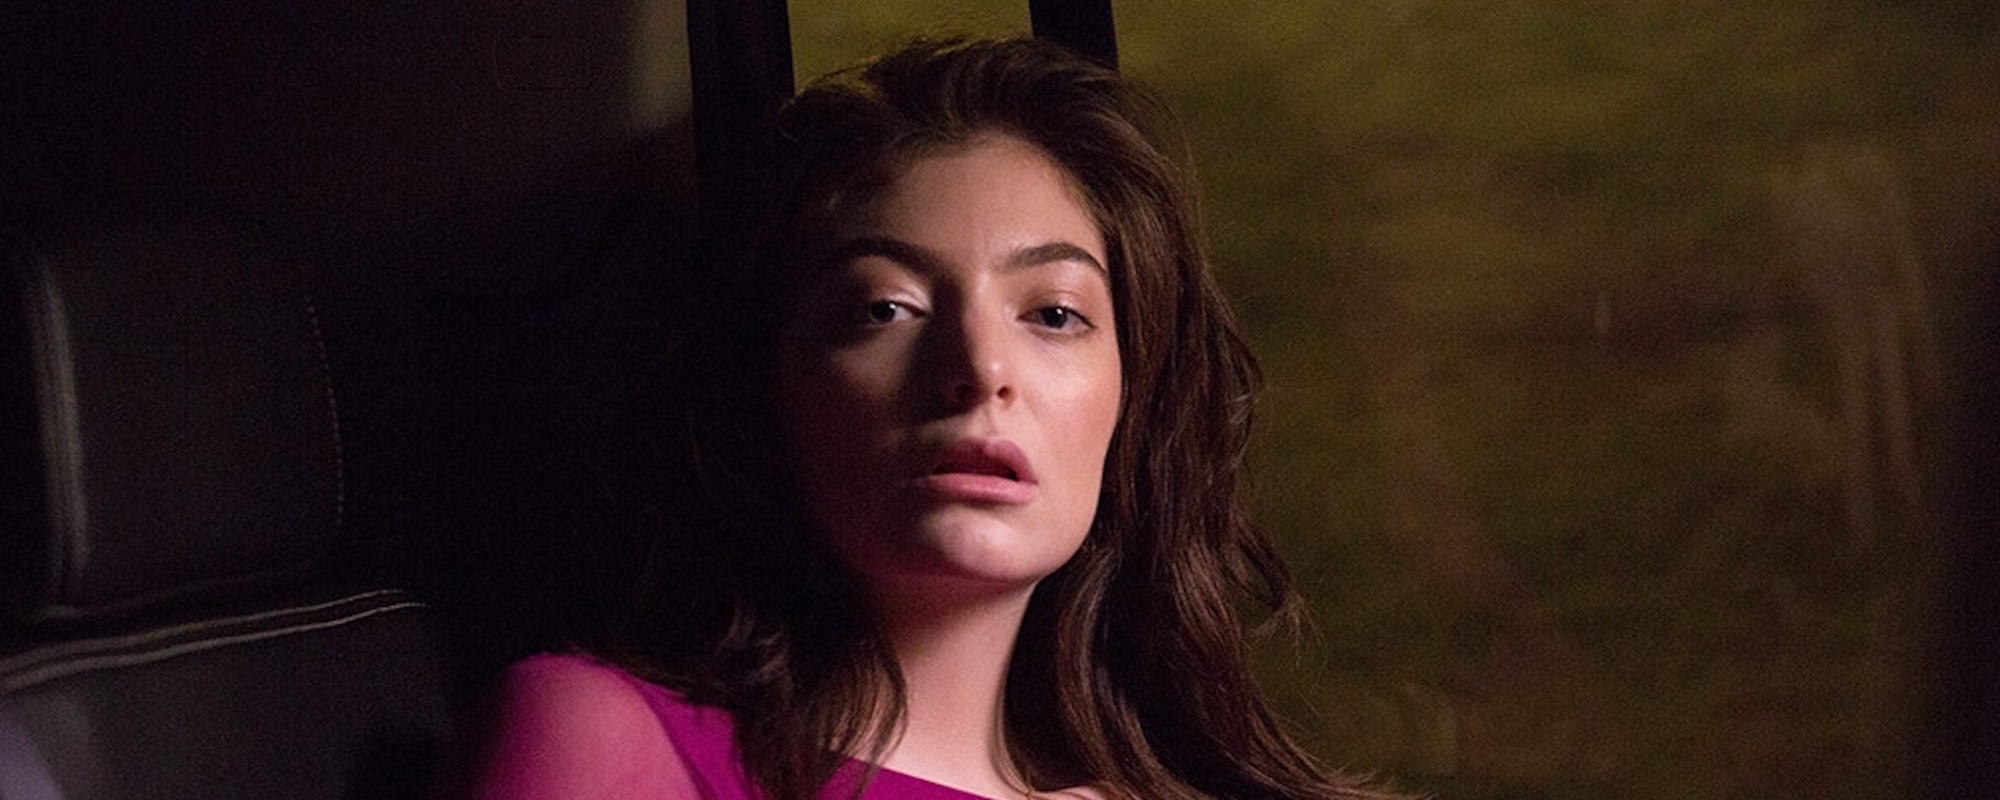 Lorde Launches New Sonos Radio Station